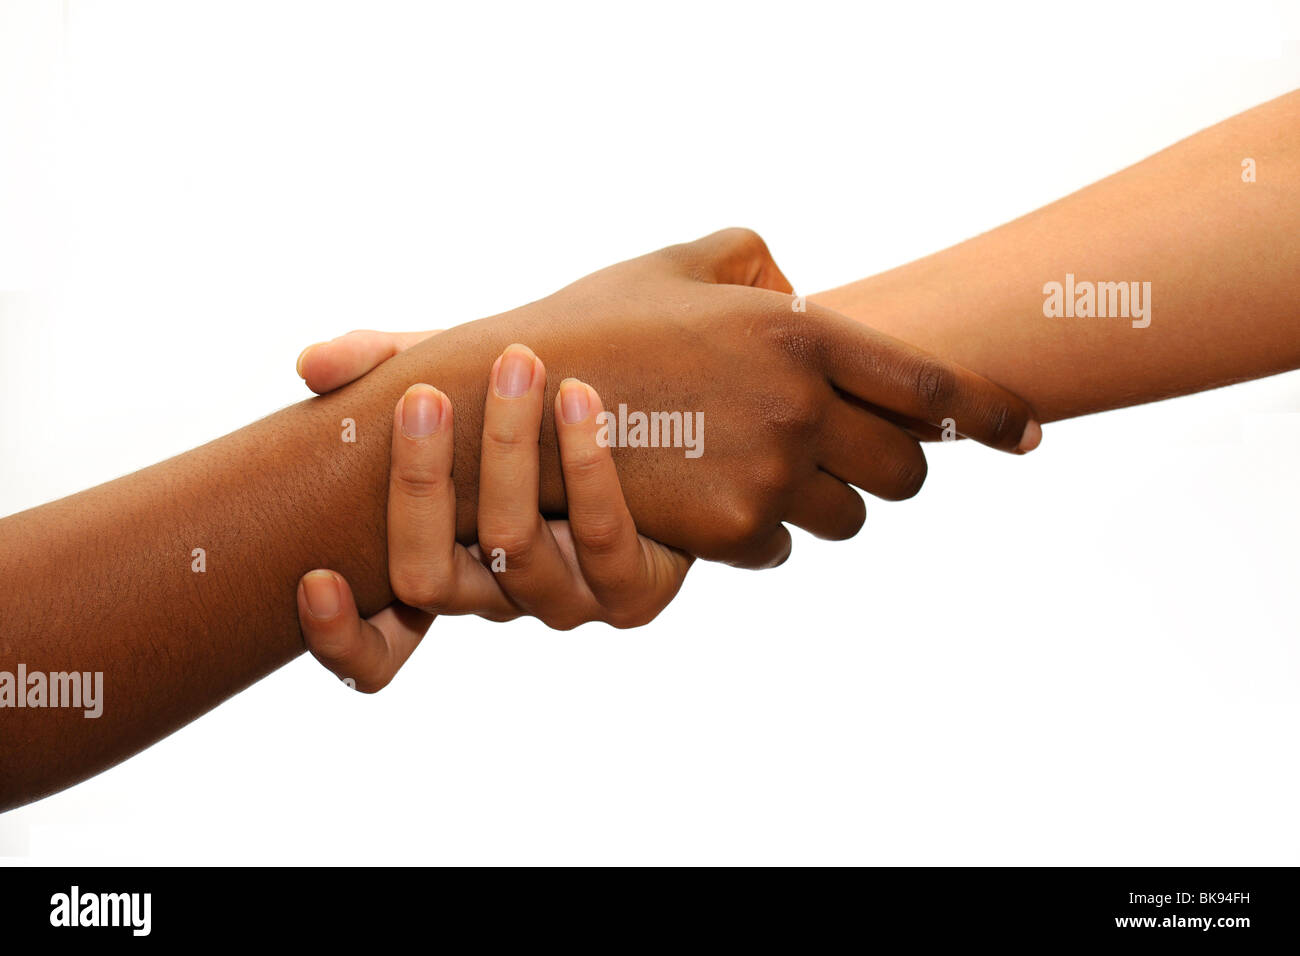 Symbolic picture for help, developement aid, black and white hand Stock Photo